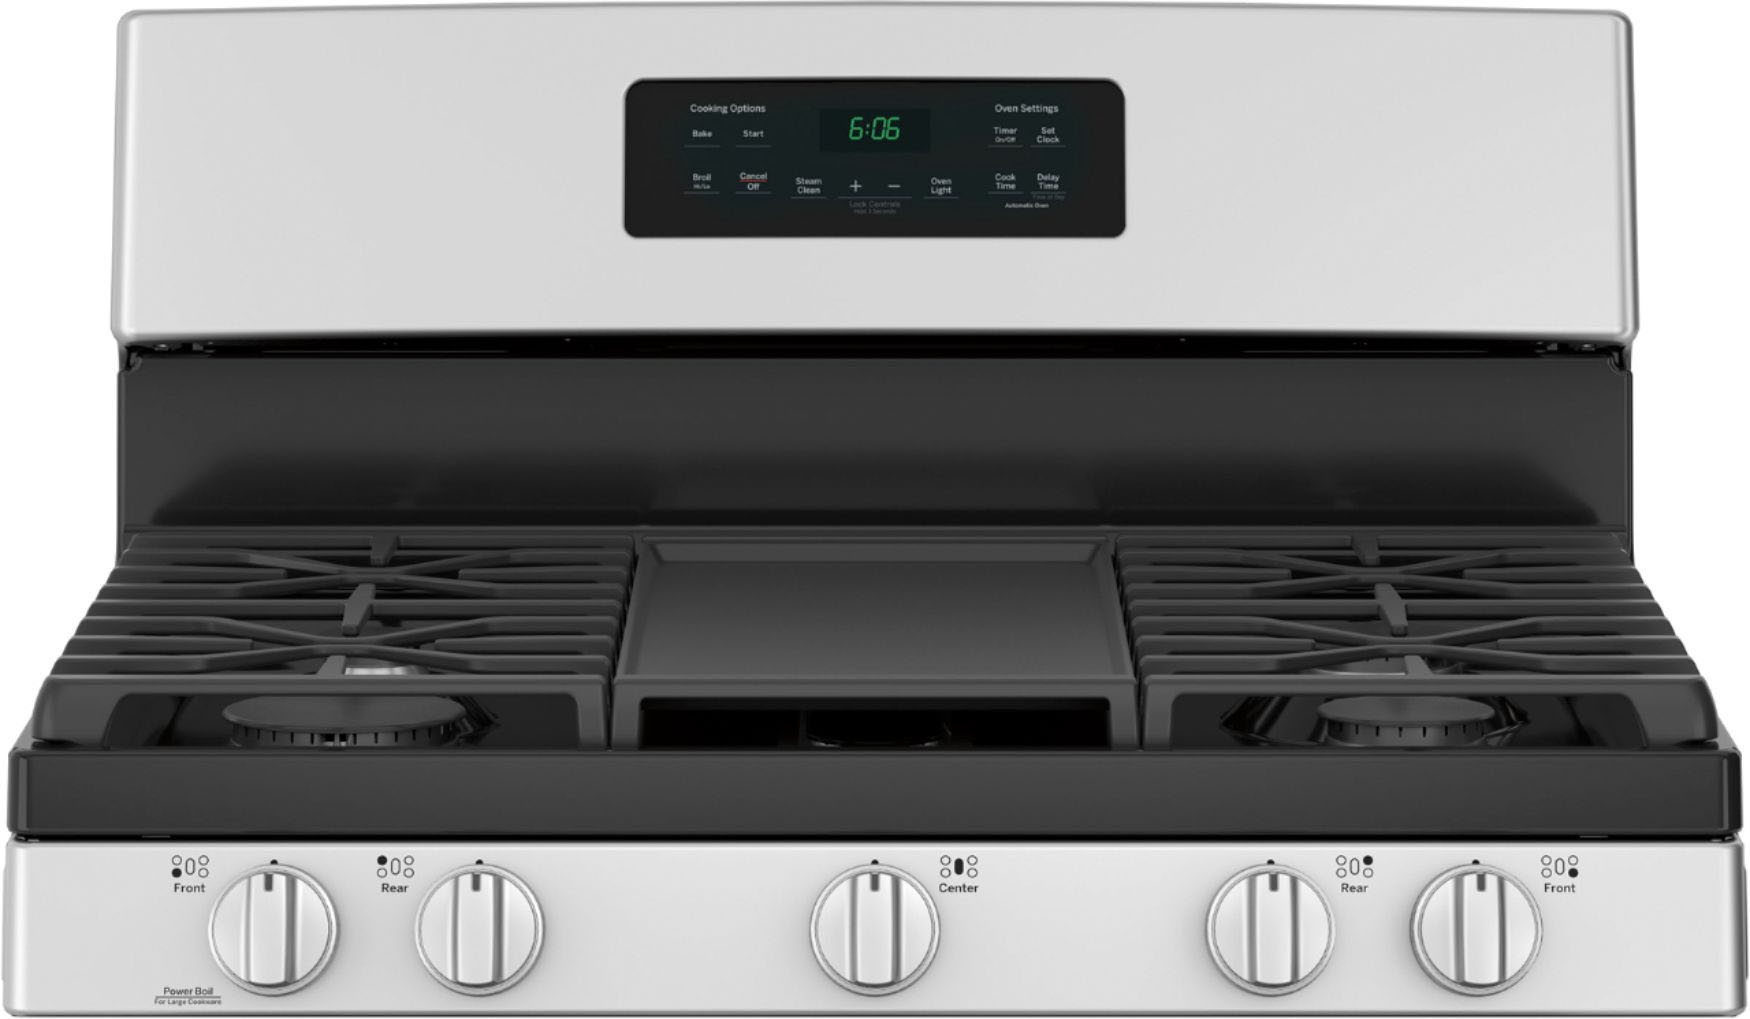 Edge-to-Edge Gas Cooktop with Extra-Large Integrated Reversible Cast Iron  Griddle and Grill